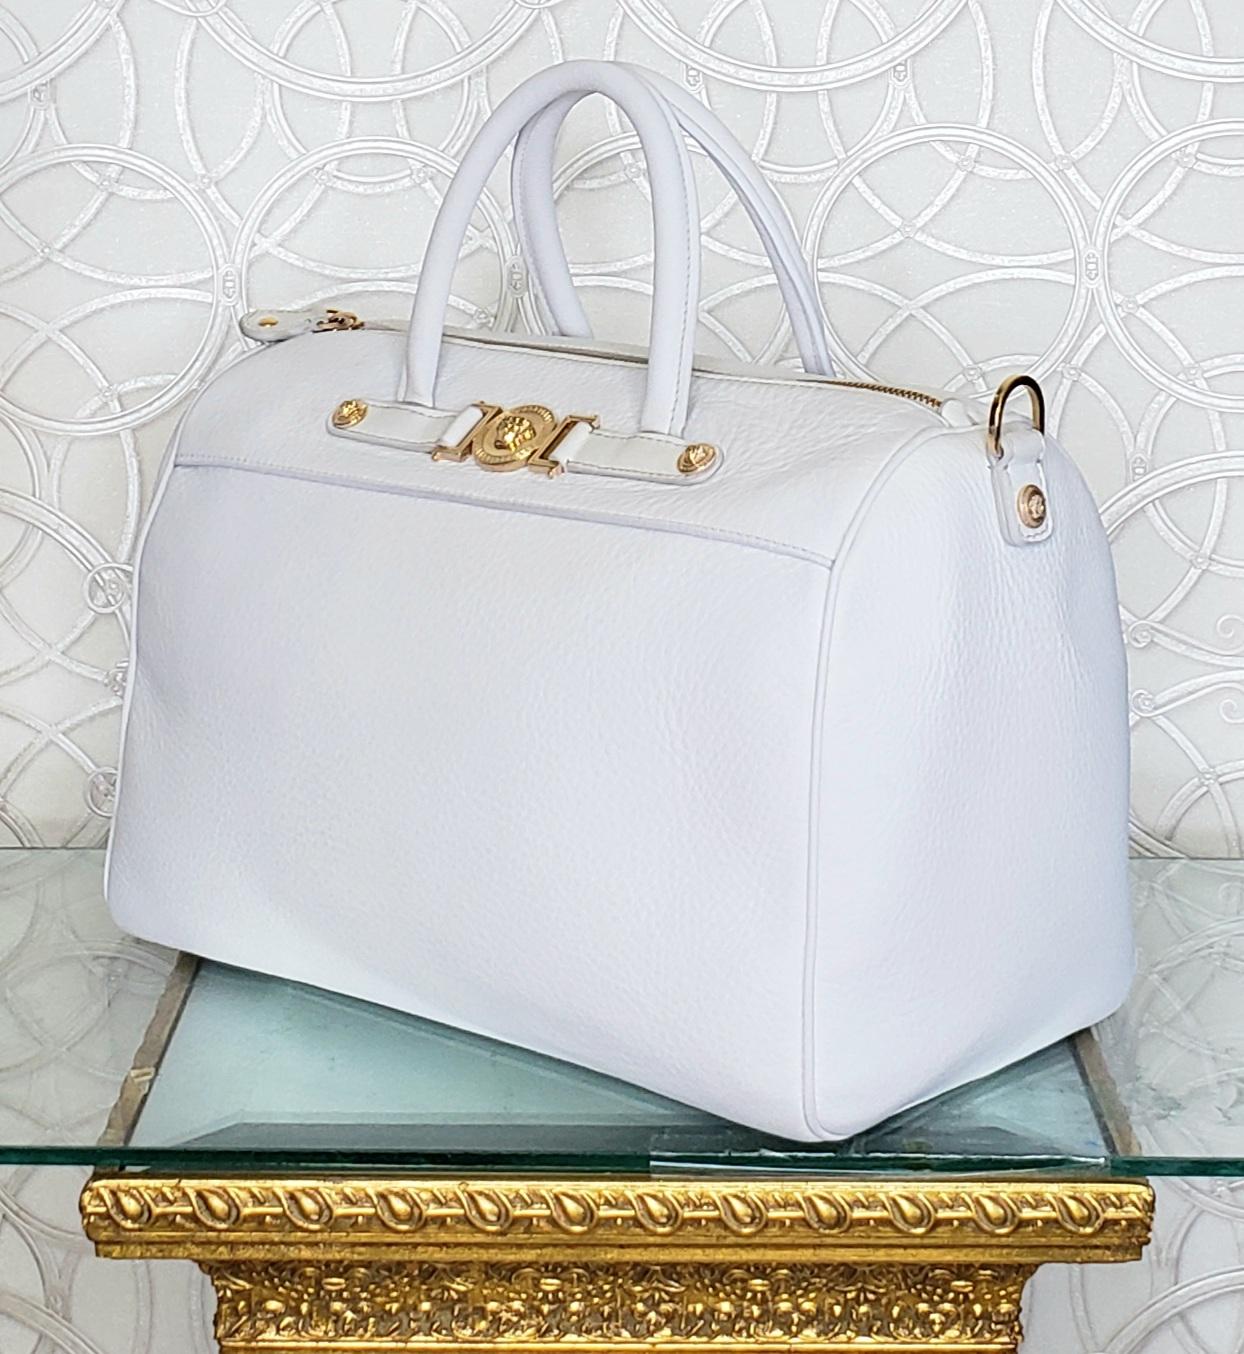 VERSACE

Versace Palazzo leather tote in white
Two top handles
Detachable shoulder strap
Fully lined
Black satin interior 
Two inner pockets
Gold-tone Medusa hardware

Made in Italy.

Height approx. 8